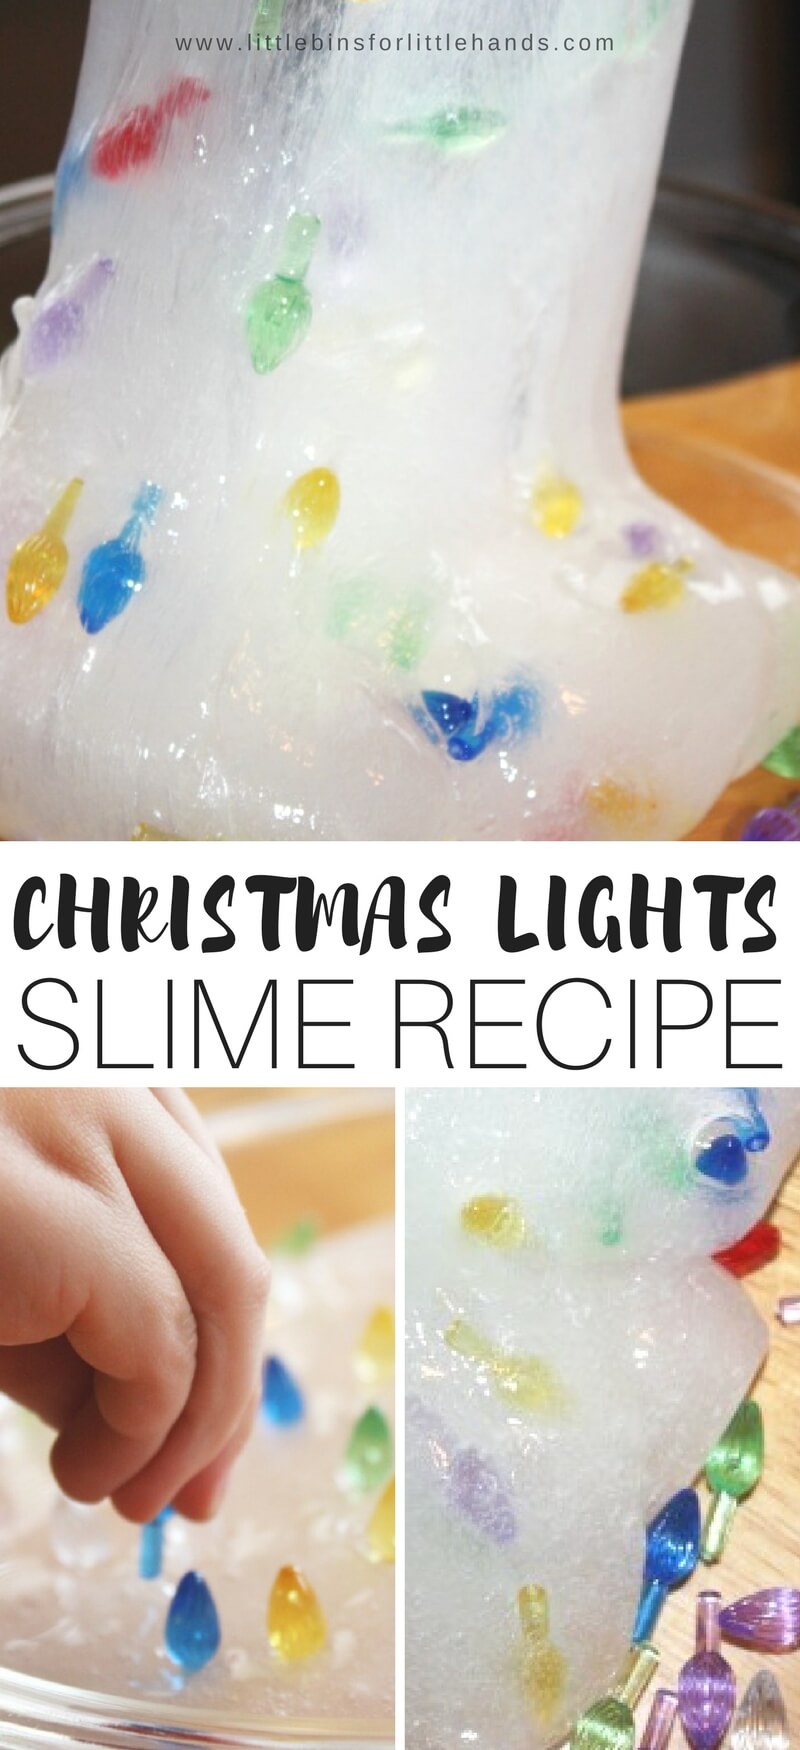 A simple Christmas slime recipe featuring mini plastic lights! Make our homemade Christmas lights slime recipe in a snap using one of our basic homemade slime recipes including our liquid starch slime, saline solution slime, or borax slime recipe for instant slime. Add fun items like these mini lights and kids can work on fine motor skills too. Making slime is awesome kids science and an easy chemistry demonstration. Plus slime making is awesome tactile sensory play that kids love. 